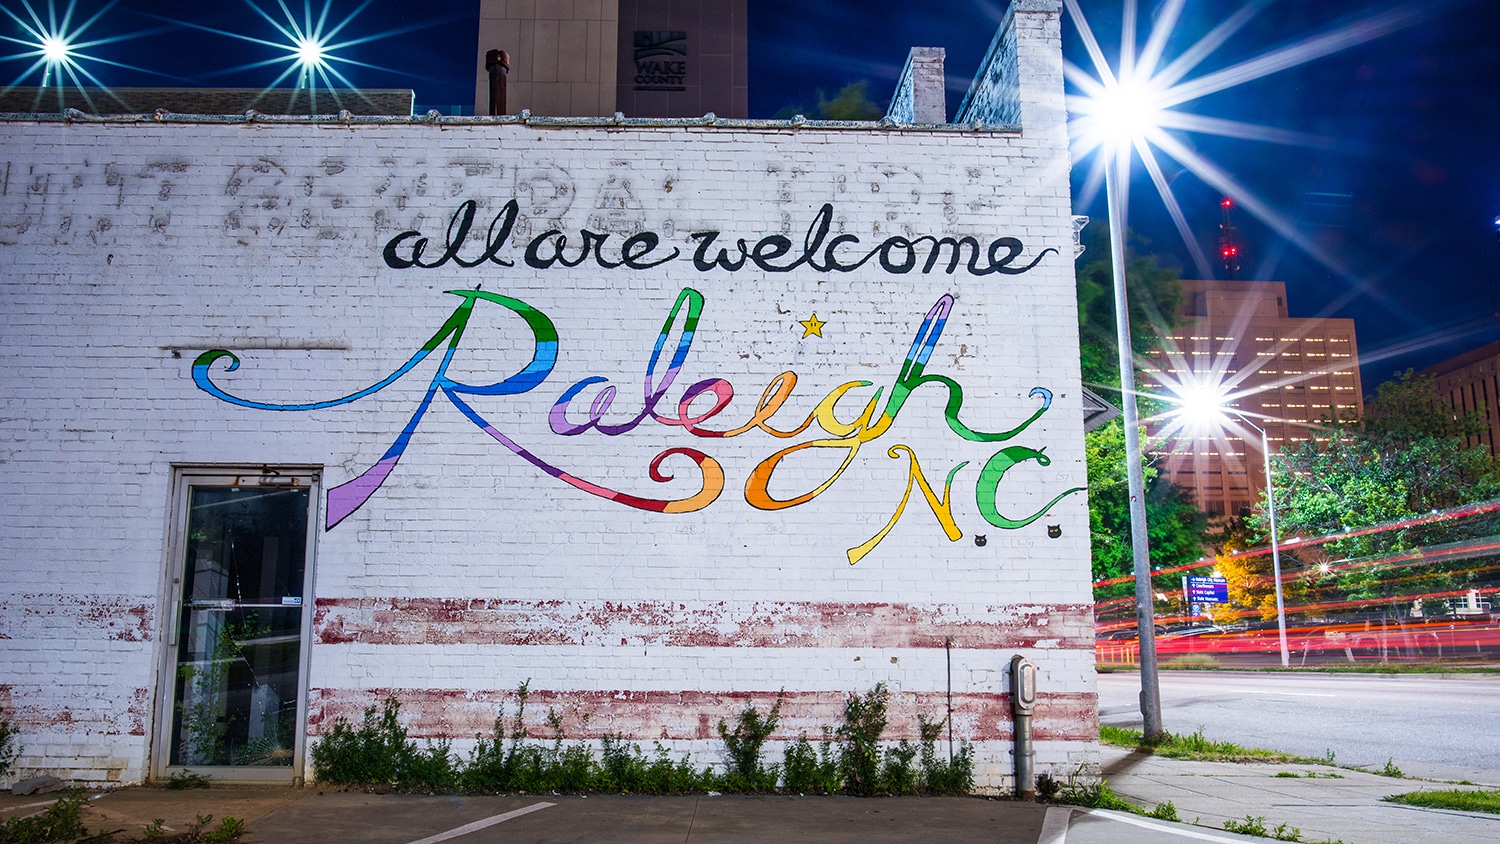 A colorful mural in downtown reads "All are welcome. Raleigh N.C."